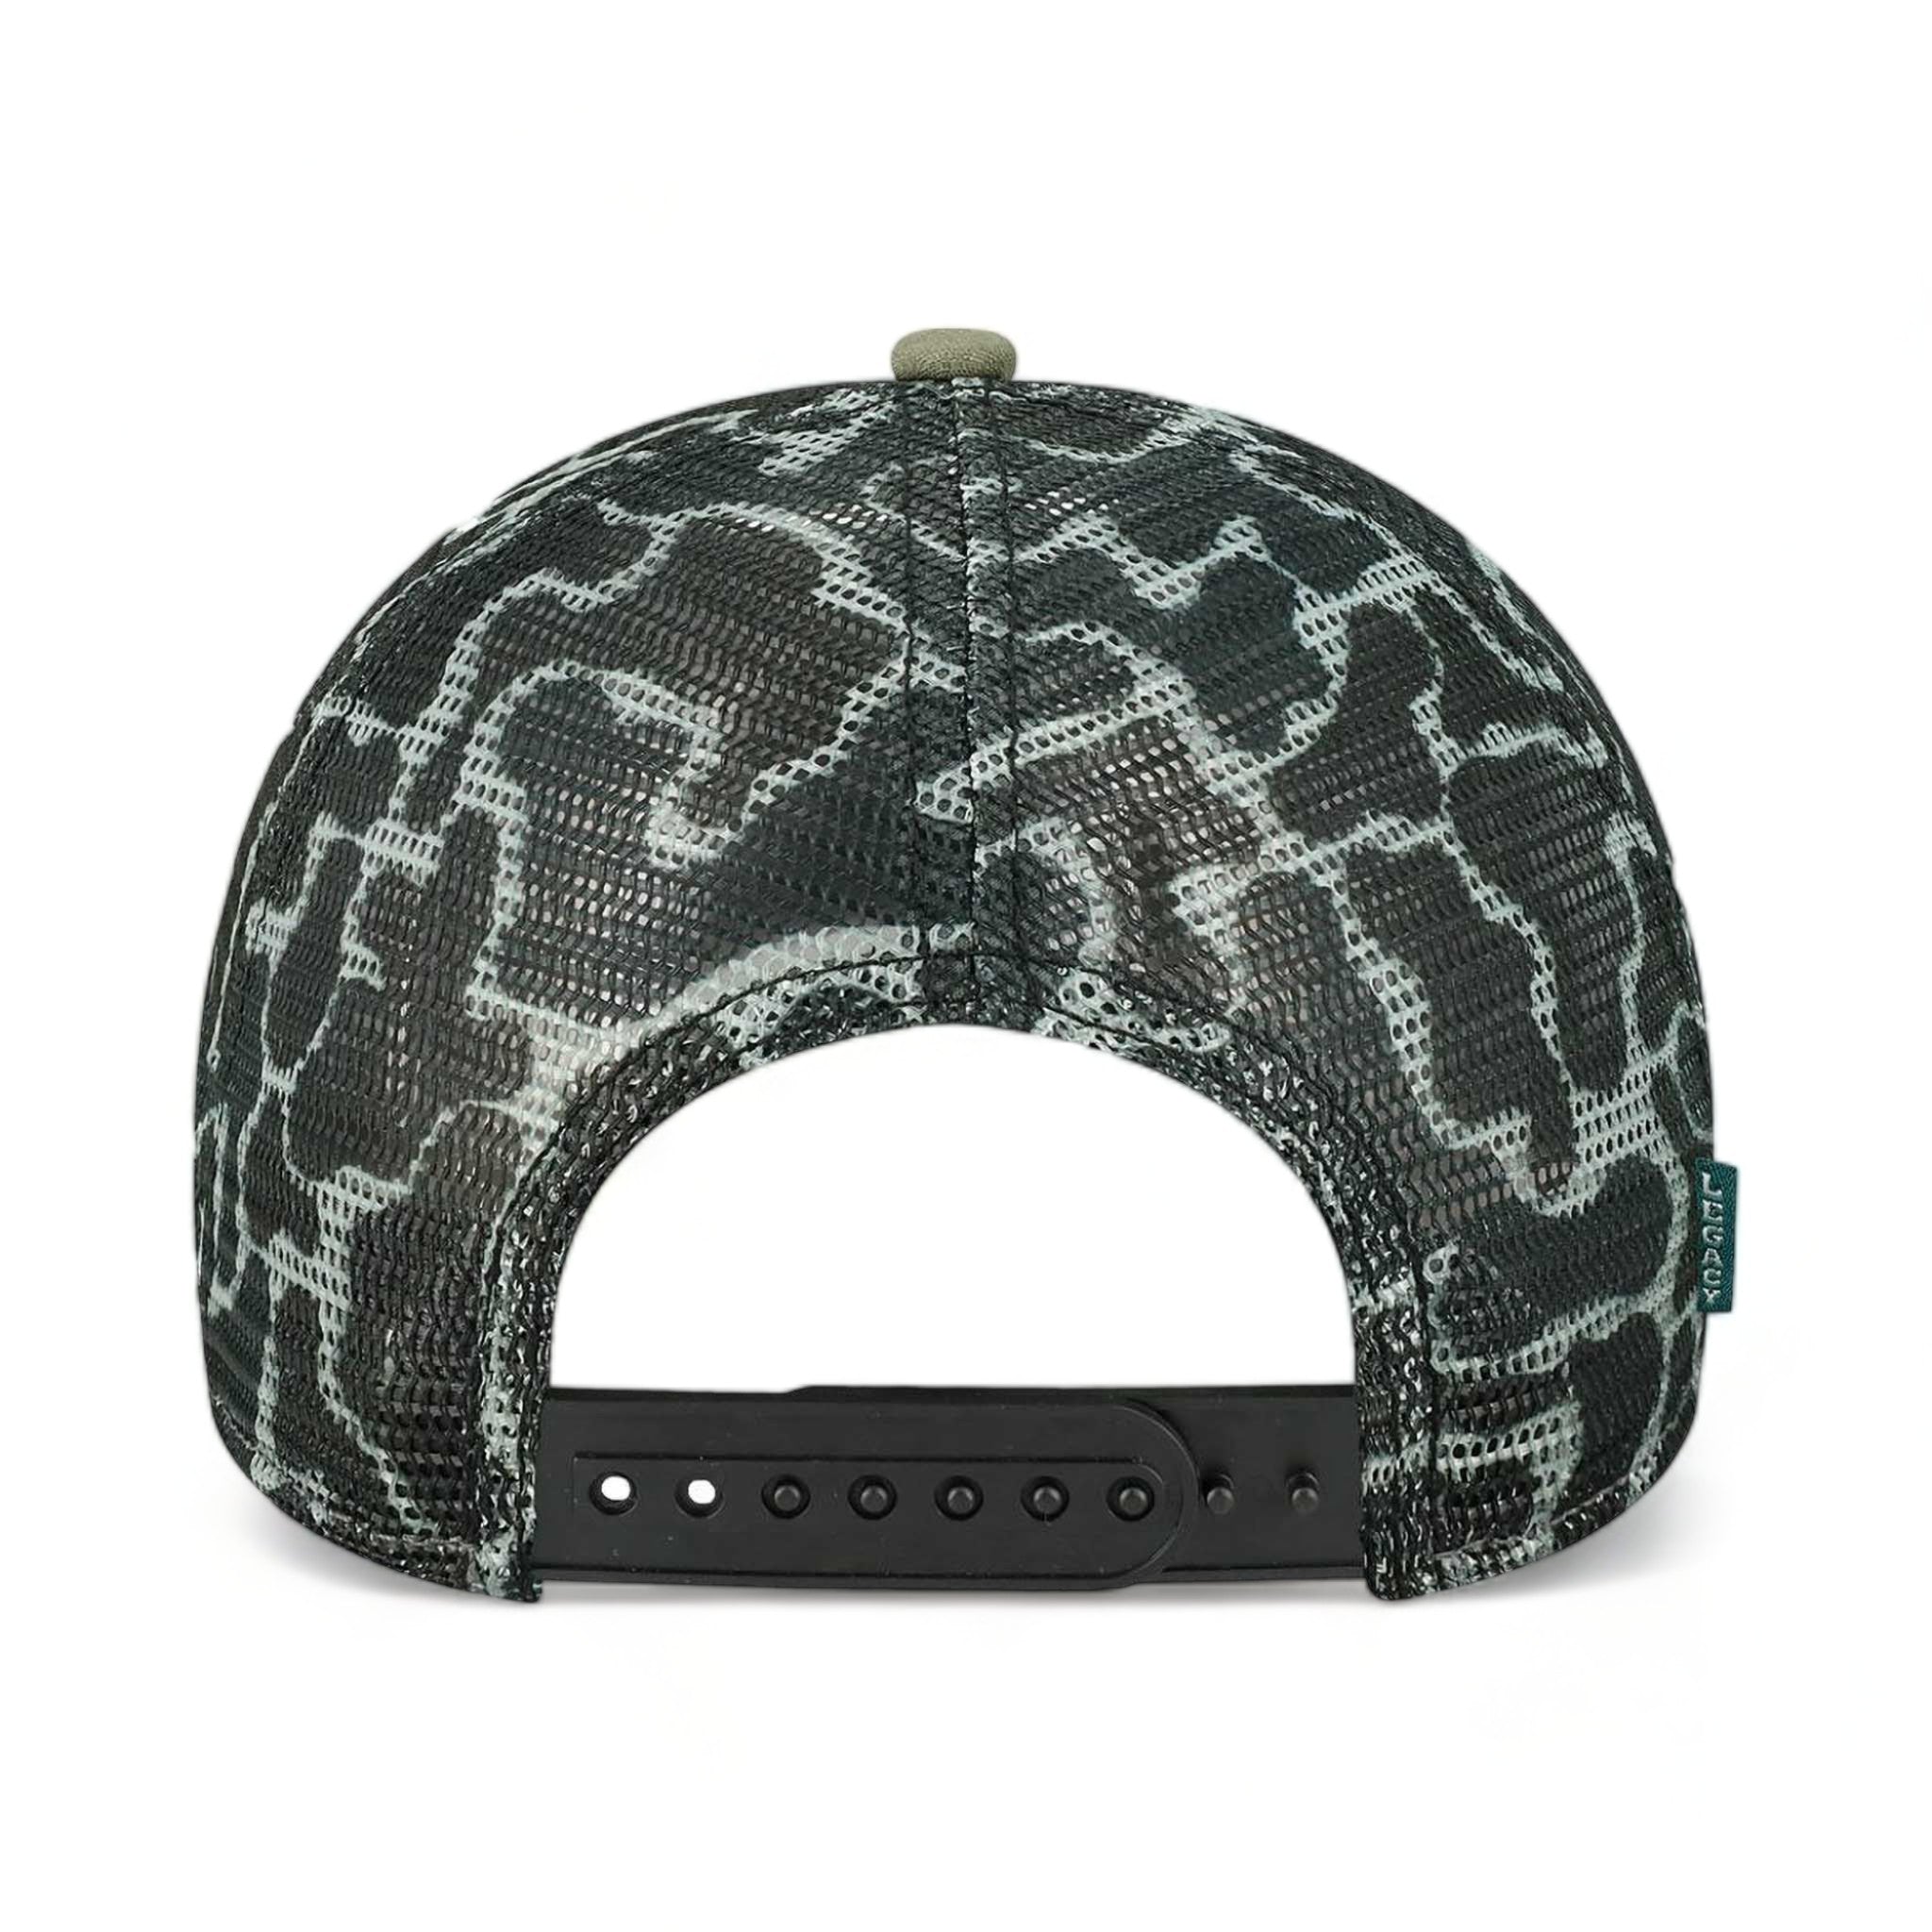 Back view of LEGACY MPS custom hat in olive, grey and grey camo